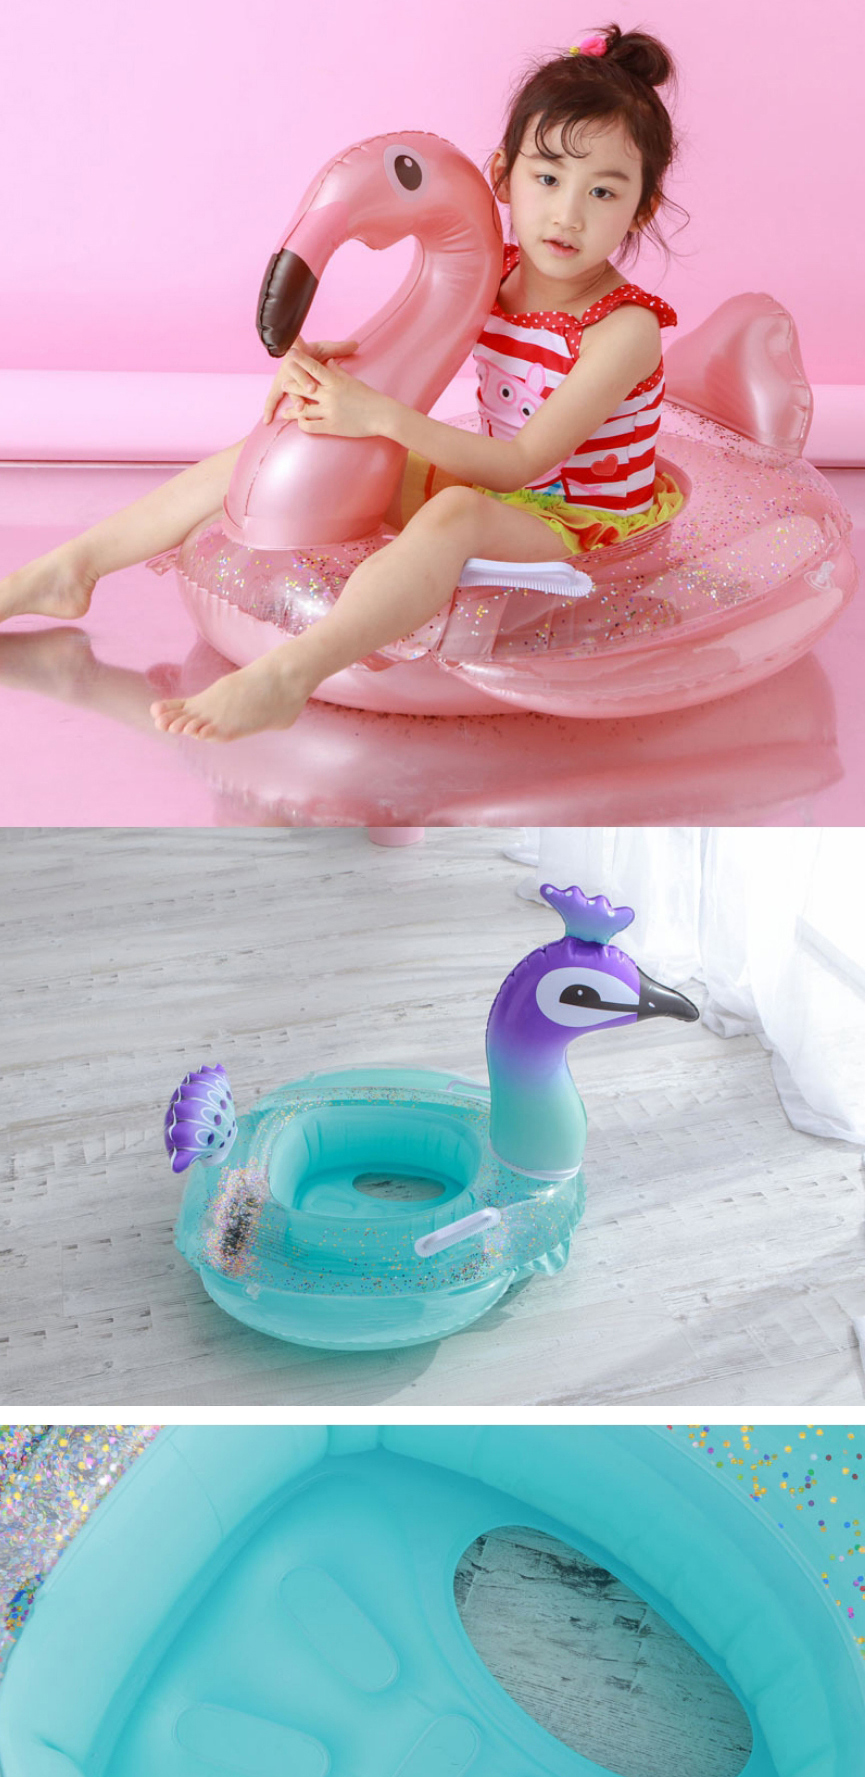 Fashion Sequined Inflatable Bottom Peacock Sequined Inflatable Bottom Boat Flamingo Unicorn Peacock Horse Bubble Bottom Child Seat,Swim Rings